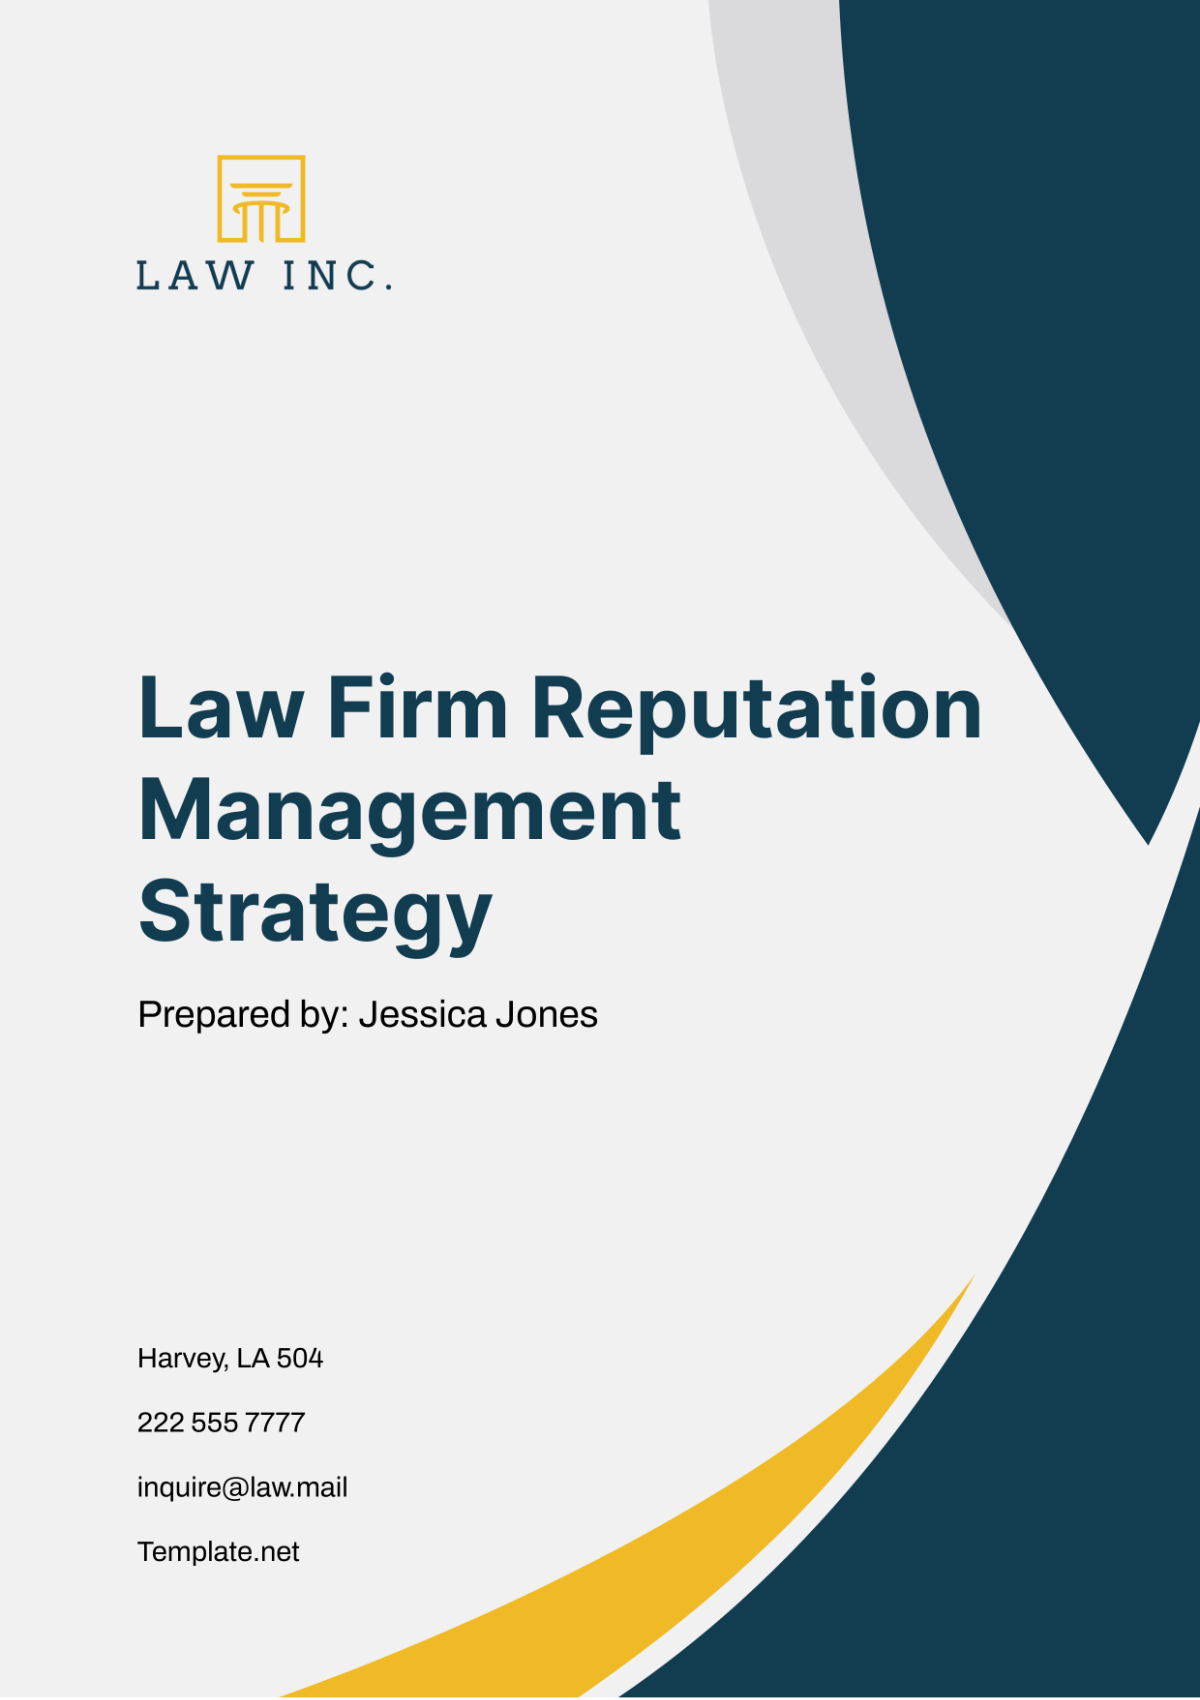 Law Firm Reputation Management Strategy Template